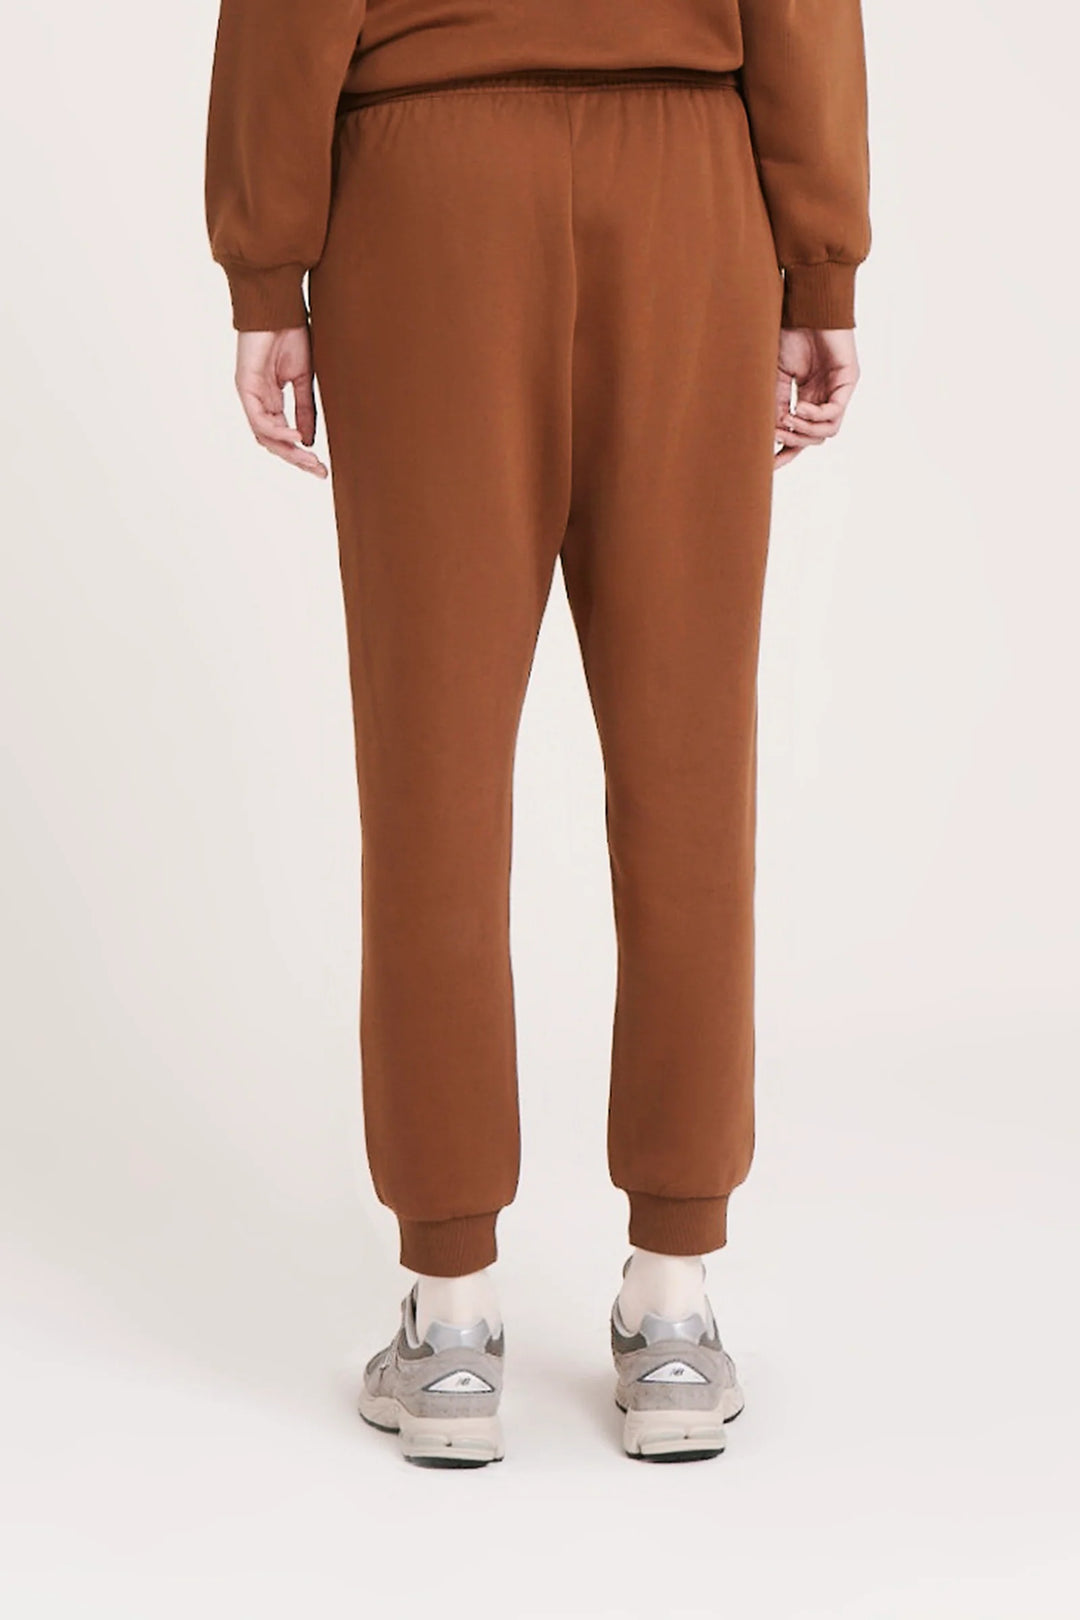 Carter Classic Trackpant - Toffee - JL & CO. boutique 